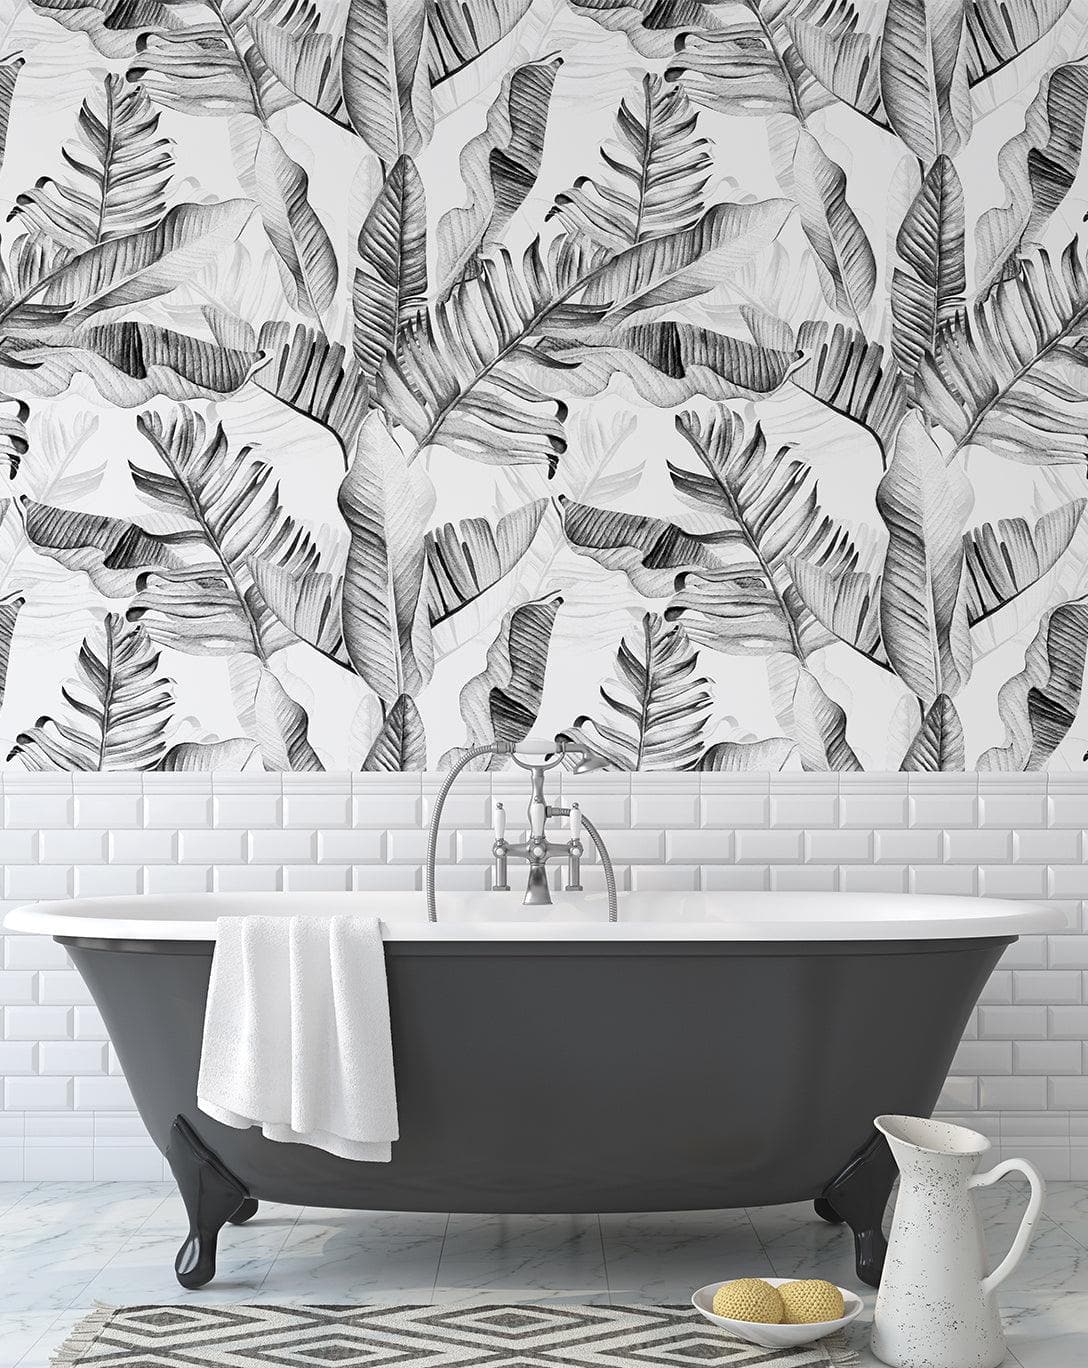 Black and White Watercolor Tropical Palm Leaves Wallpaper Black and White Watercolor Tropical Palm Leaves Wallpaper 